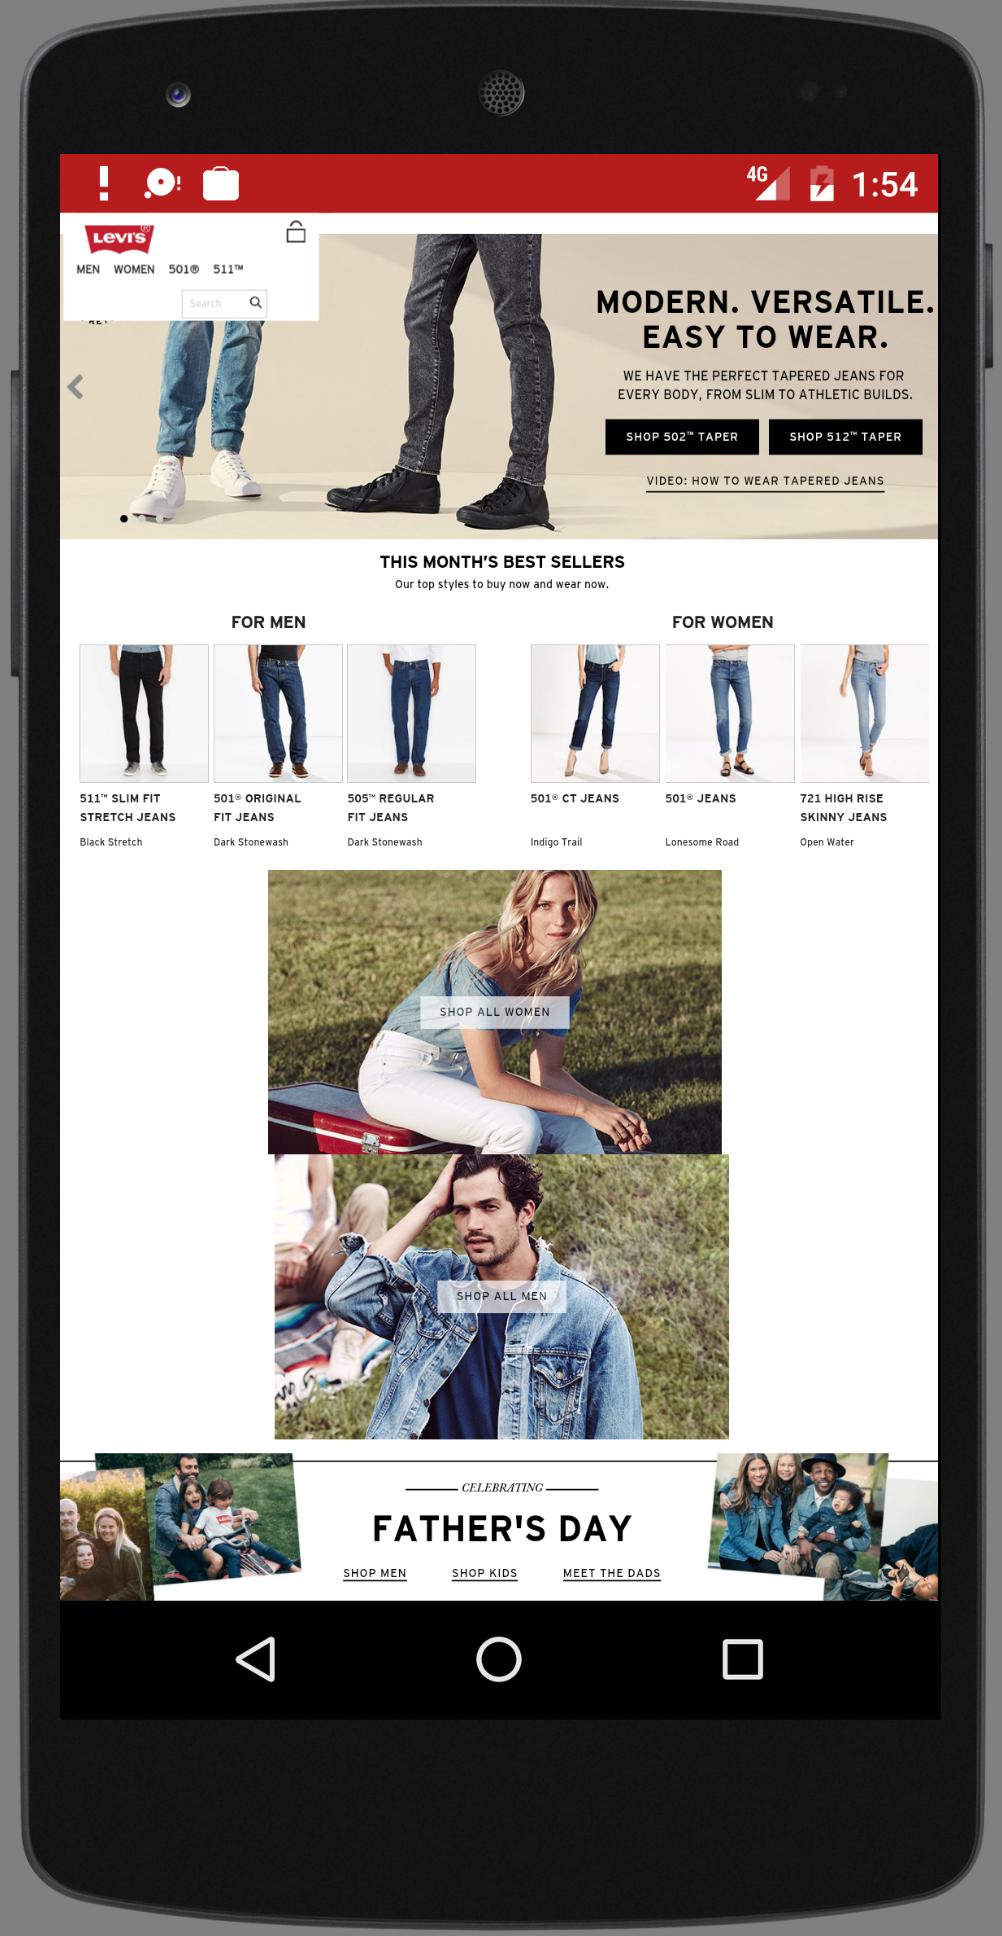 Levis Bn for Android - APK Download